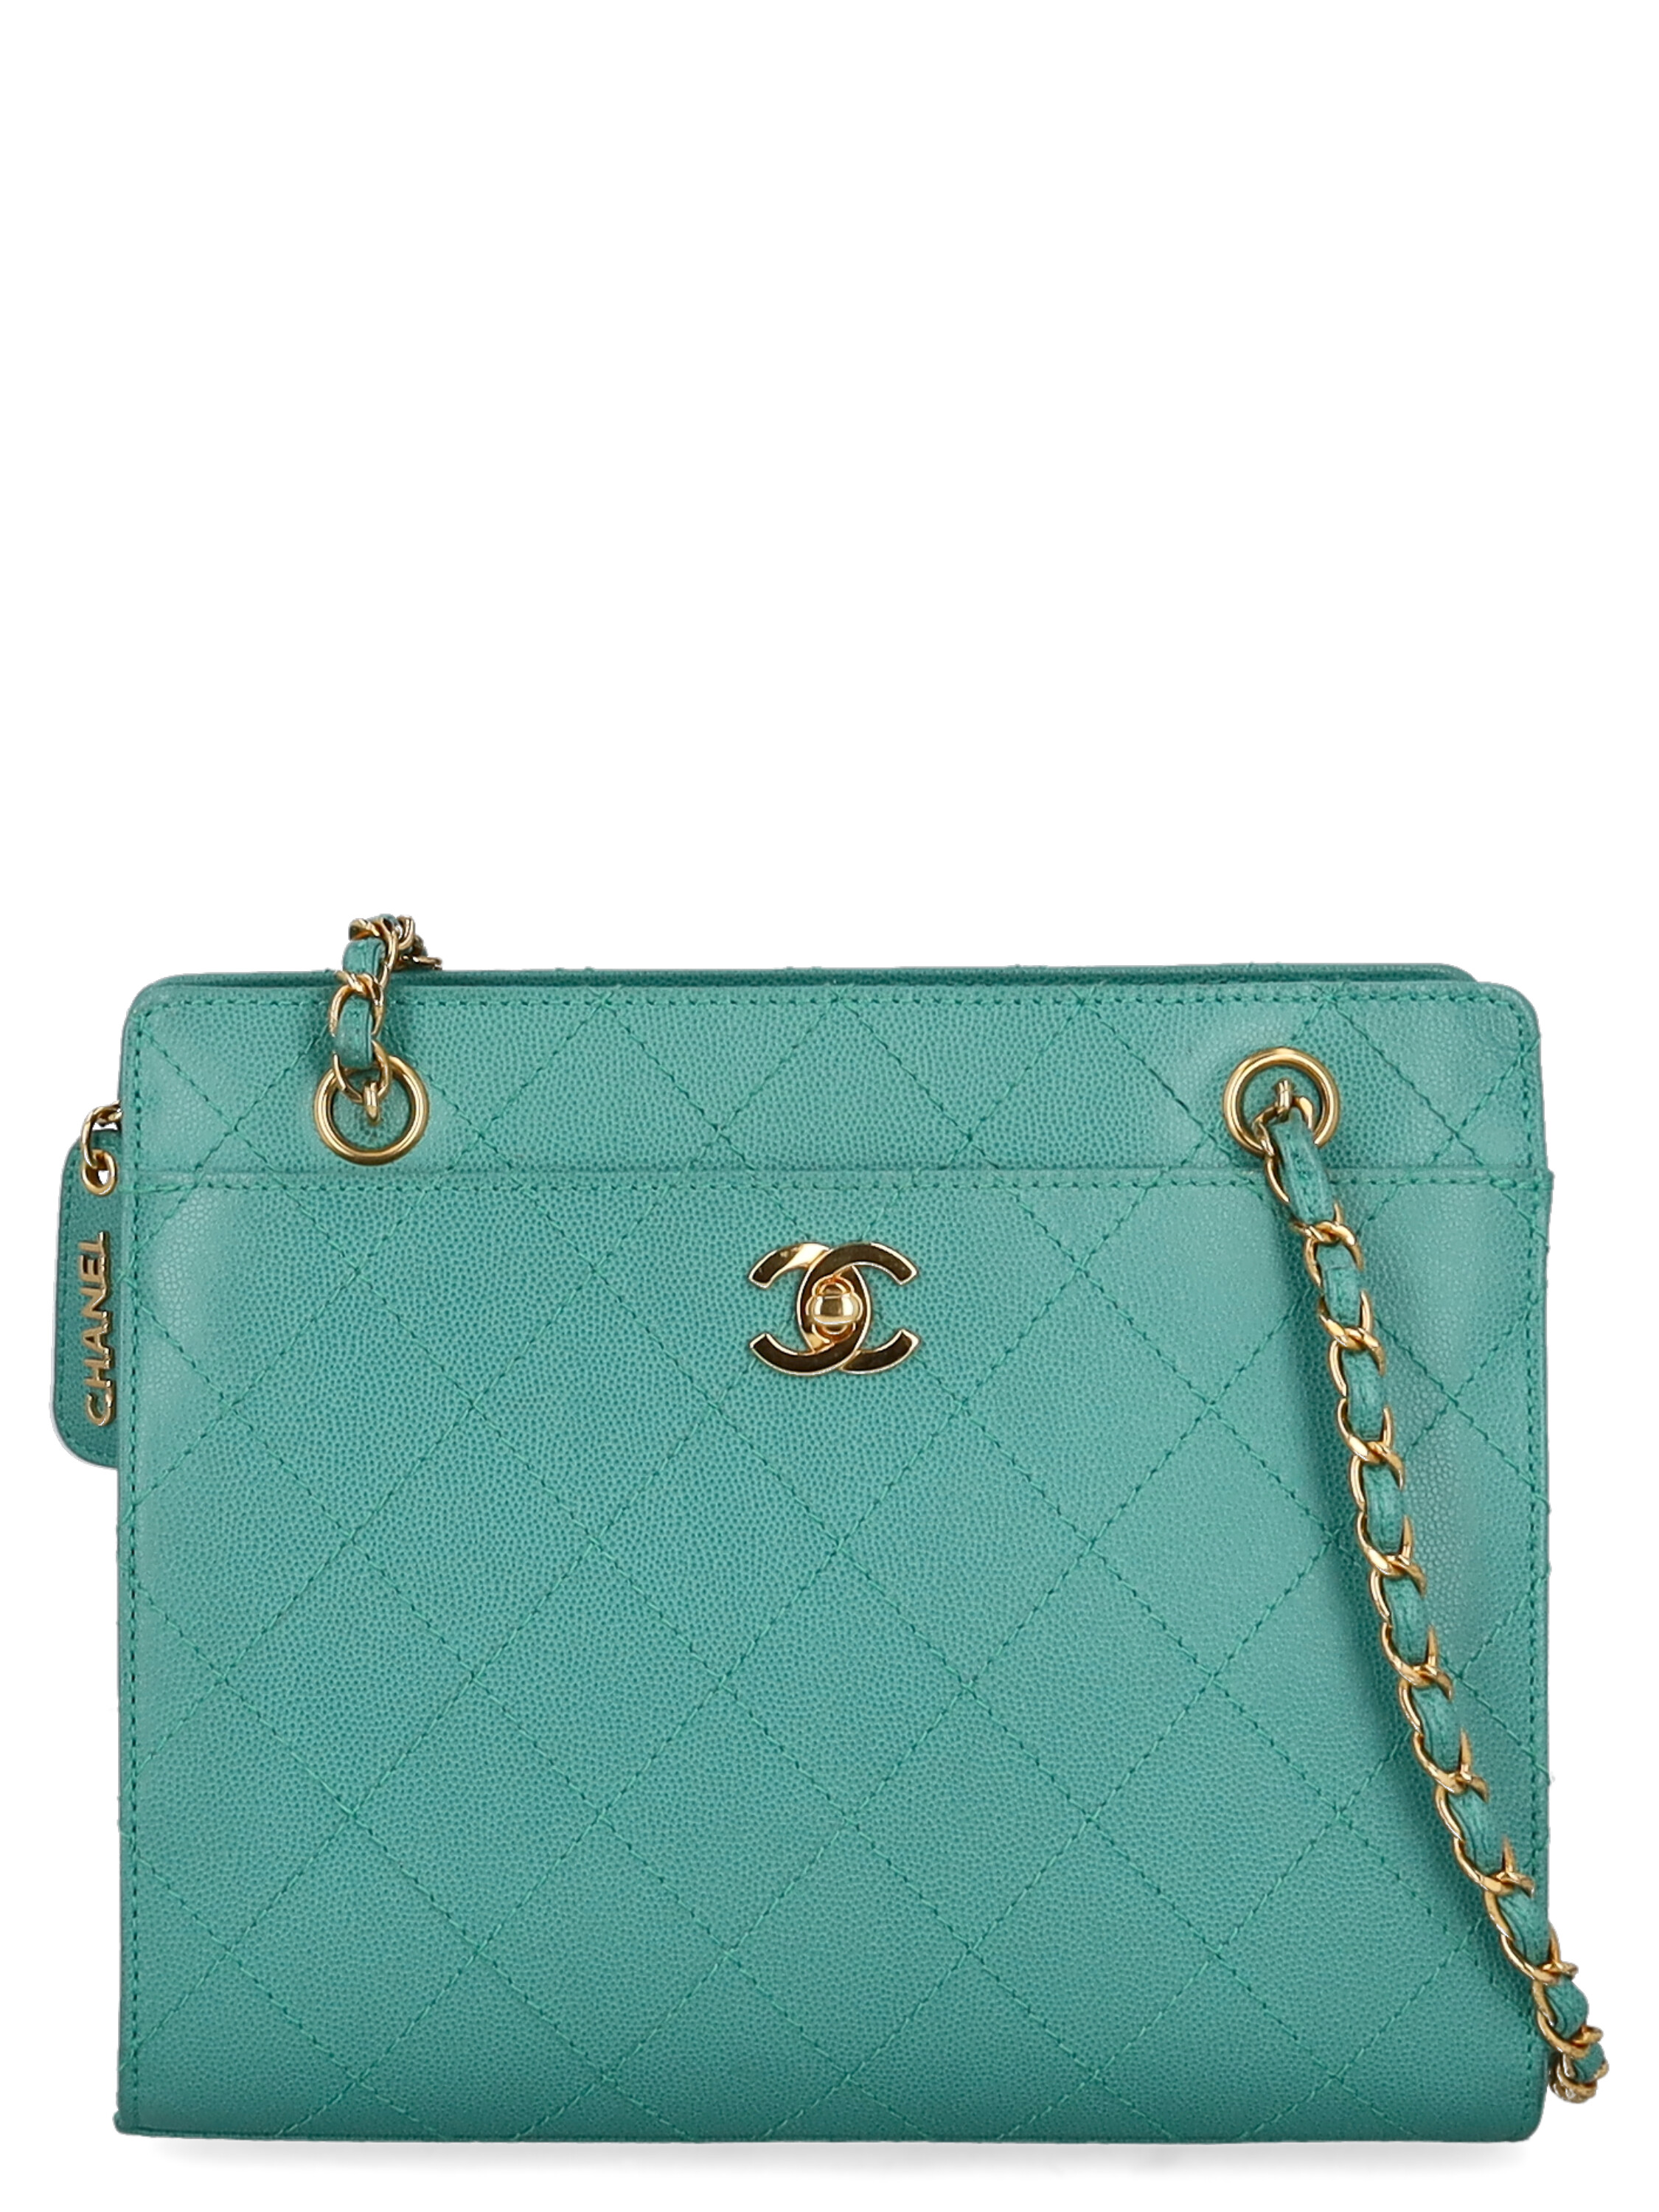 Pre-owned Chanel Women's Shoulder Bags -  - In Green Leather